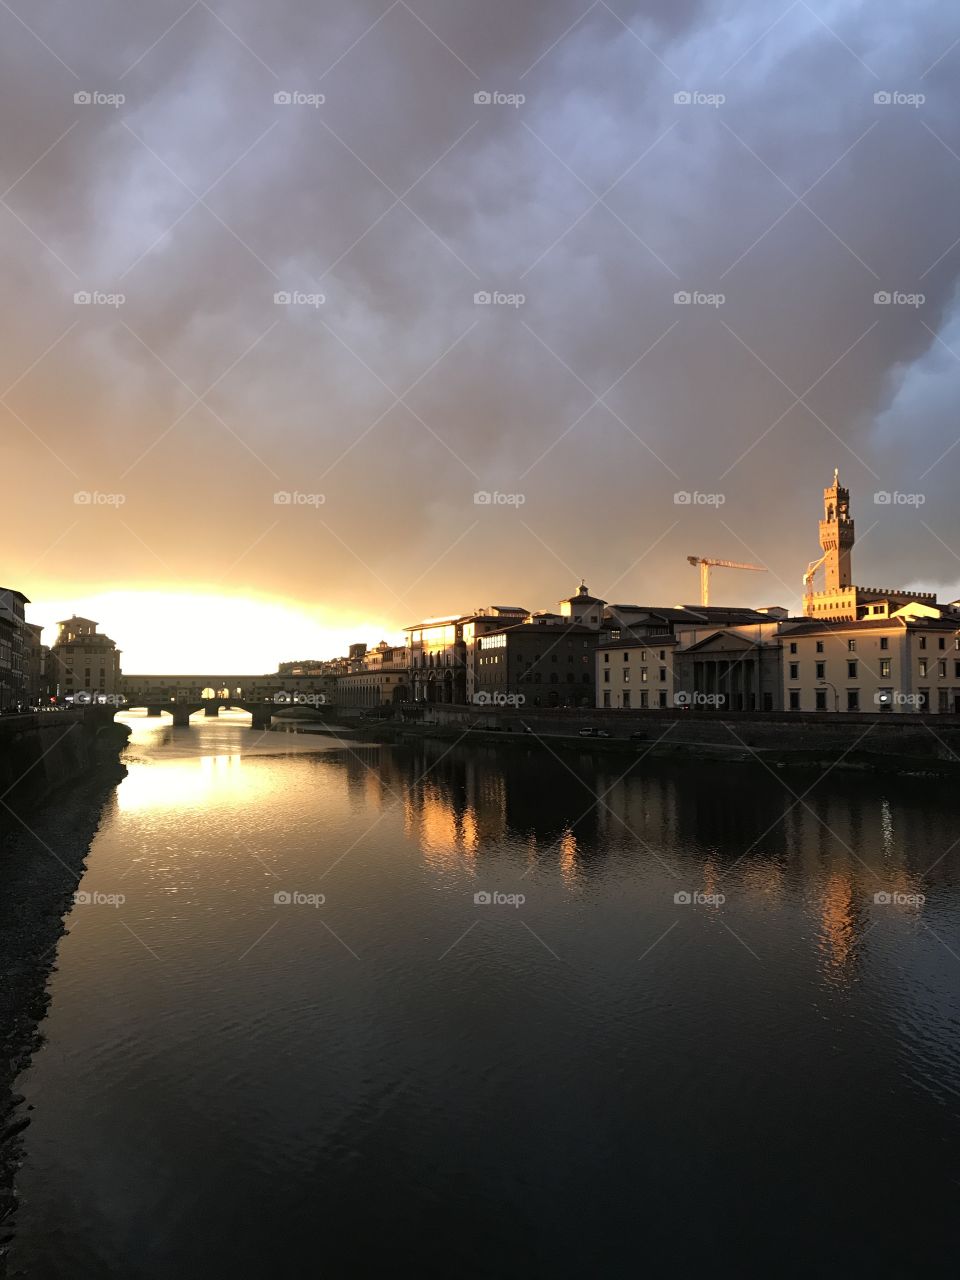 The beautiful evening sun setting over the Ponte Vecchio with rays of sun hitting against the rooftops.